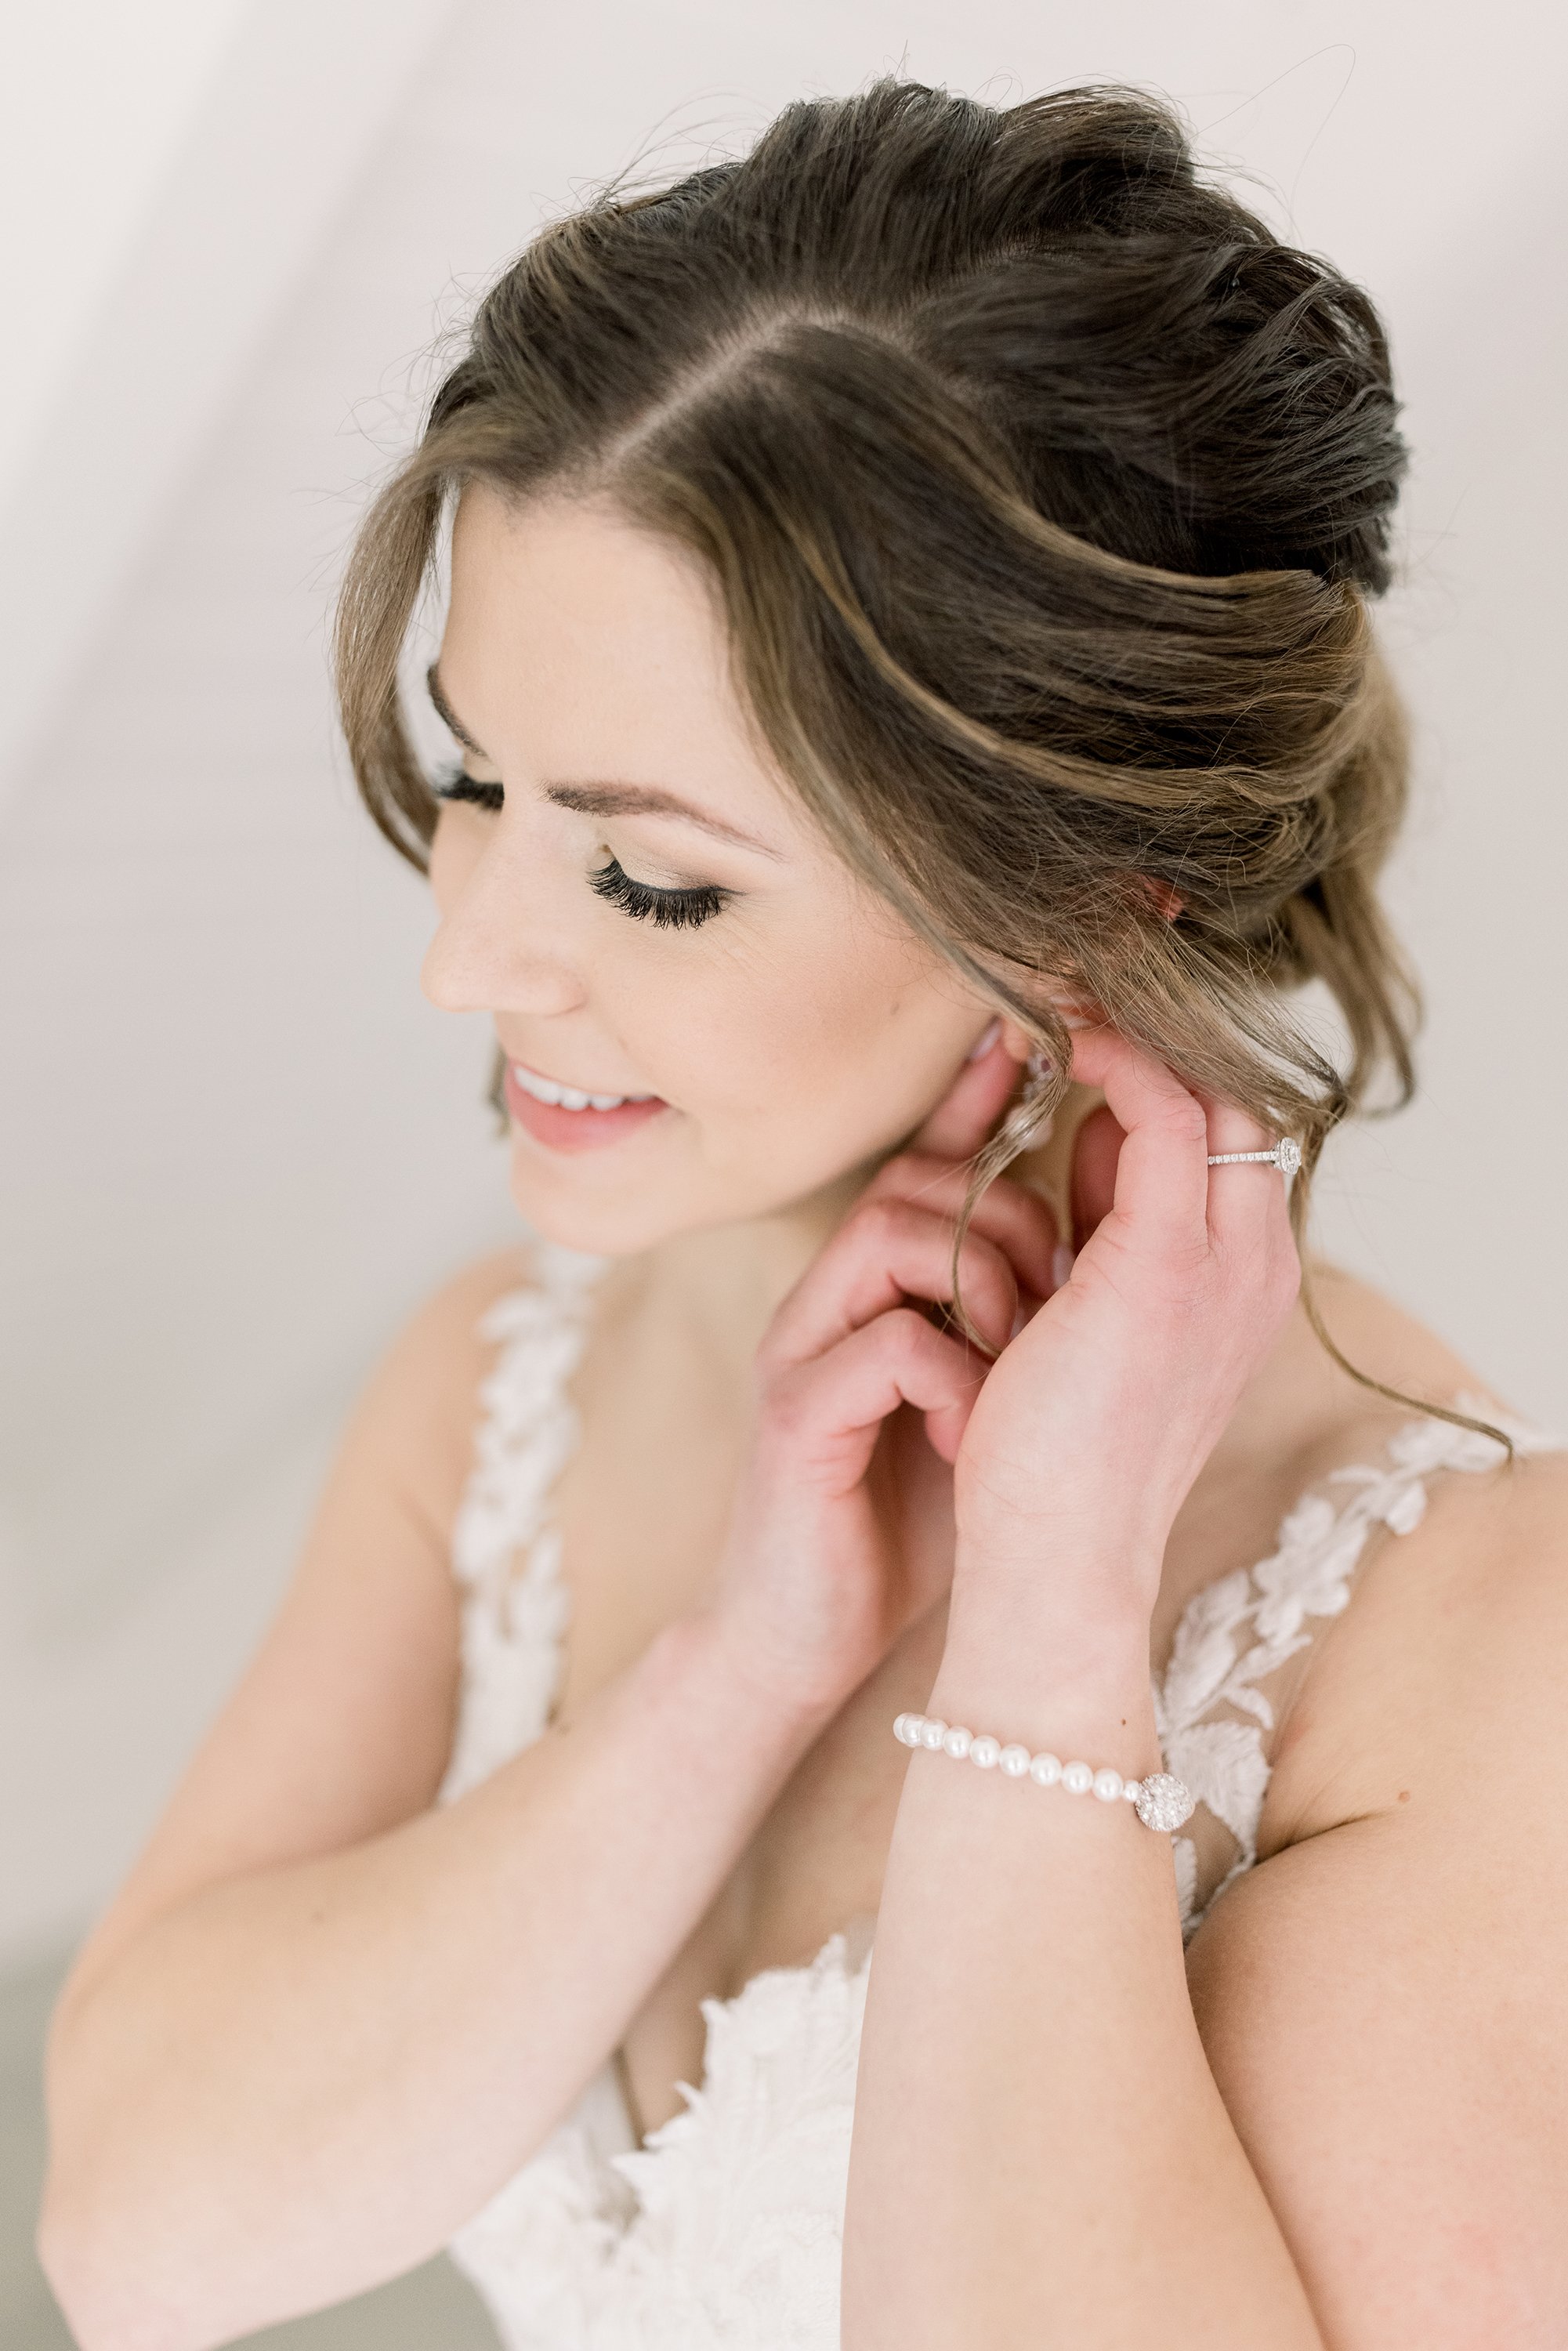  Wedding photographer Chelsea Mason Photography captures a close-up portrait of a bride putting in her earrings. wedding day bridal jewelry #ChelseaMasonPhotography #ChelseaMasonWeddings #WakefieldWeddings #LeBelvedere #Wakefieldweddingphotographers 